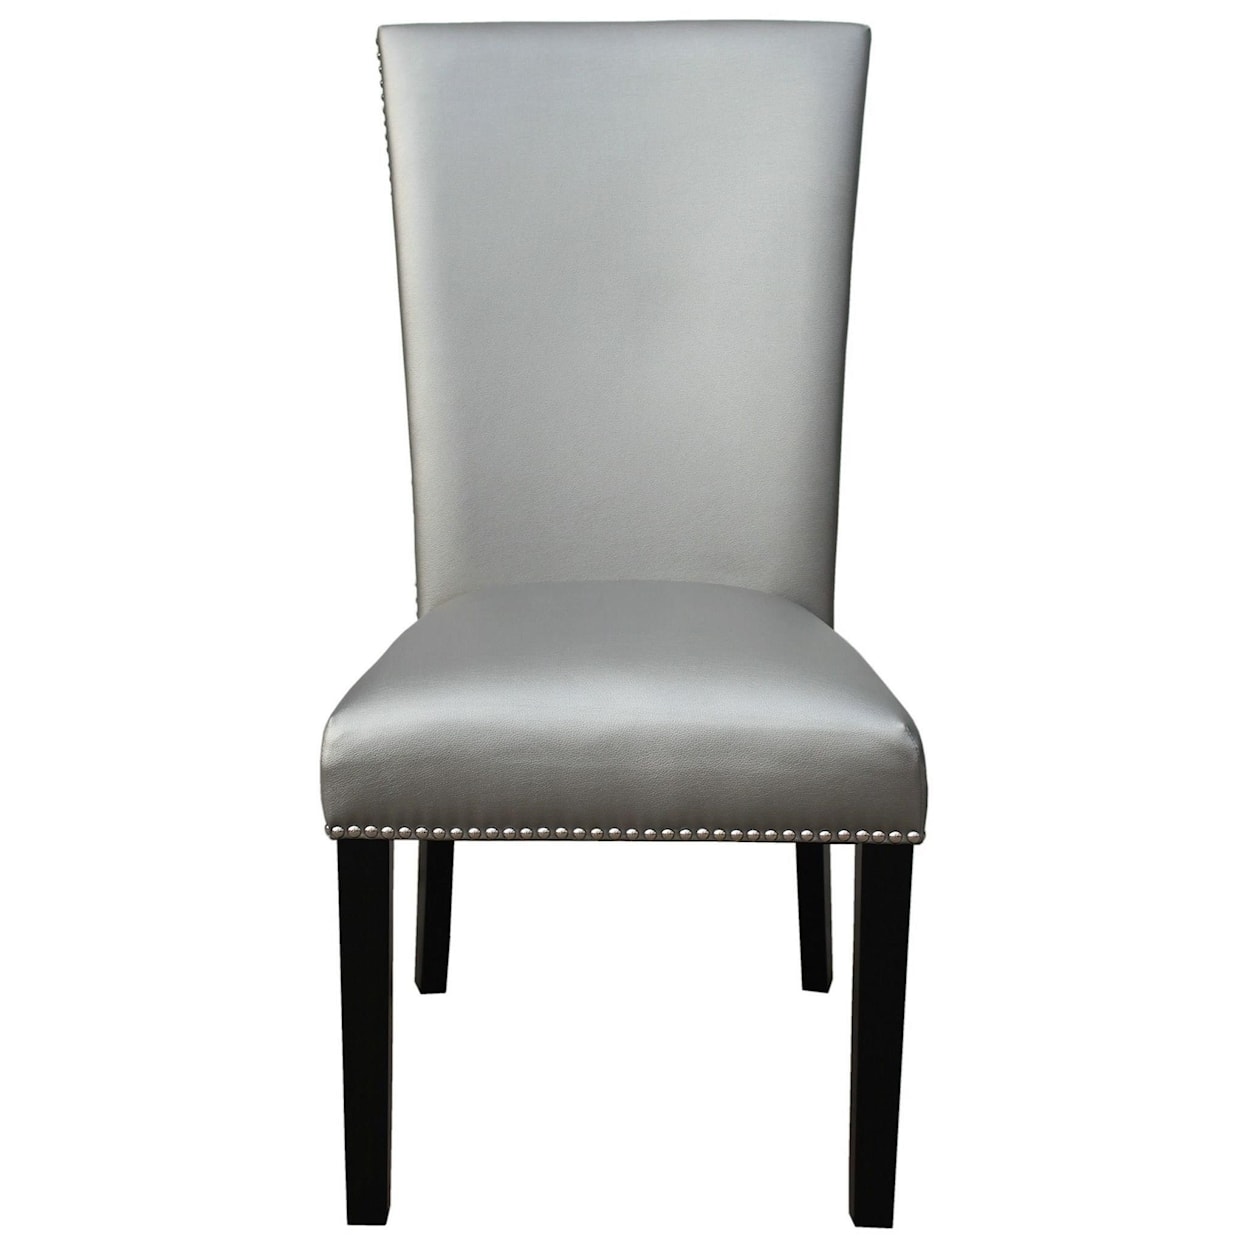 Prime Camila Dining Chair with Nailhead